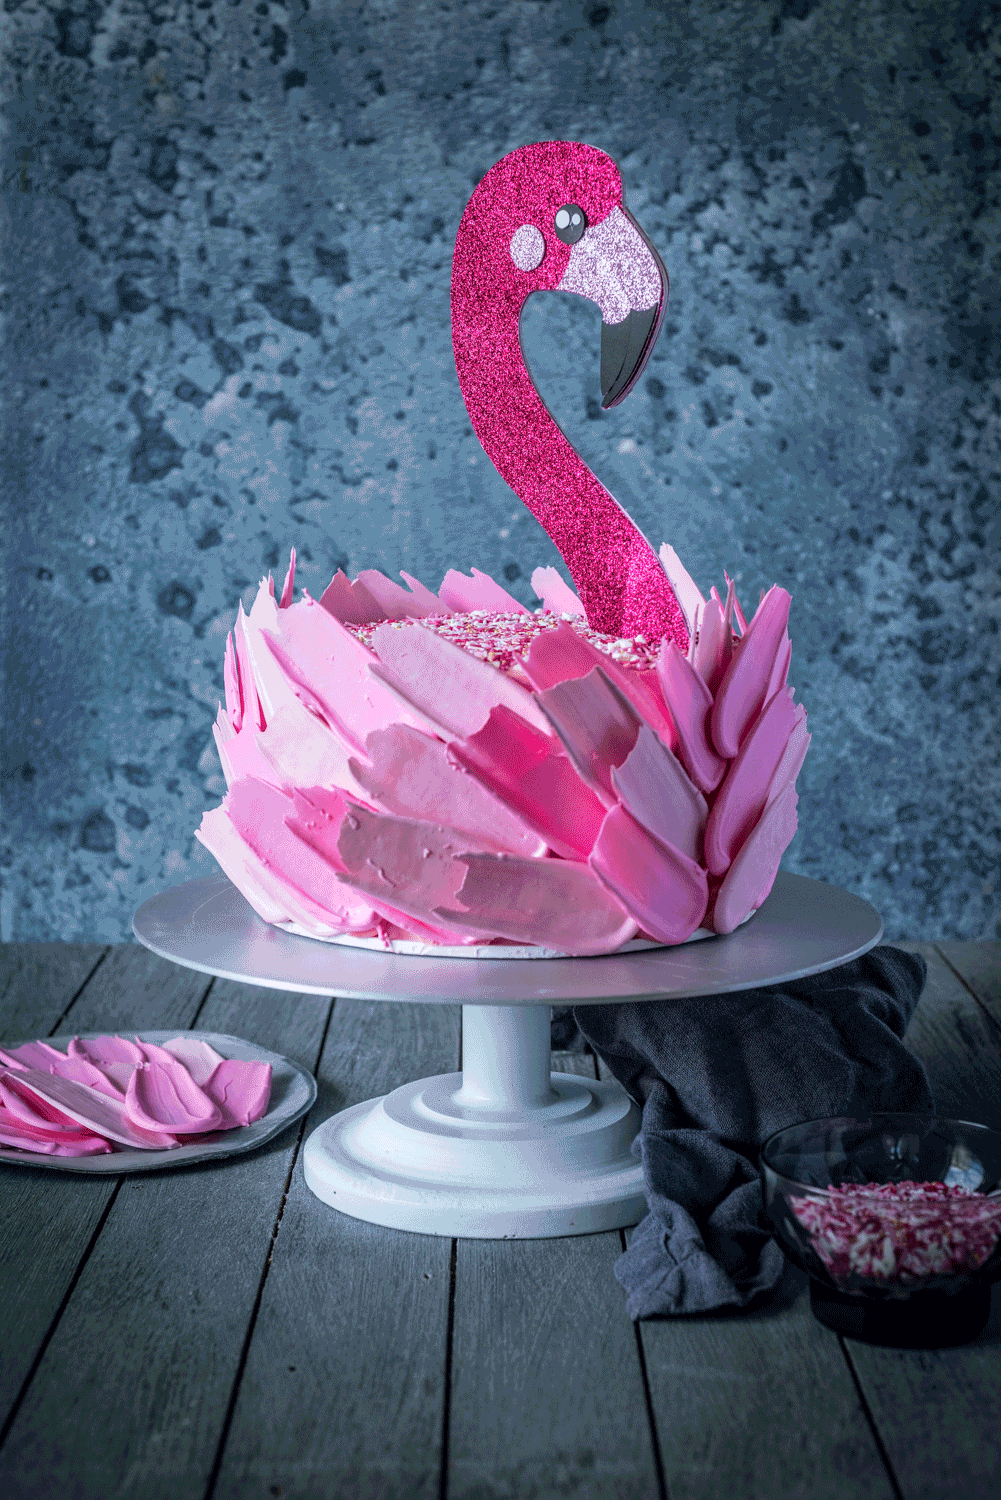 Flamingo Cake and Cake Decorating Tips | Chew Town Food Blog